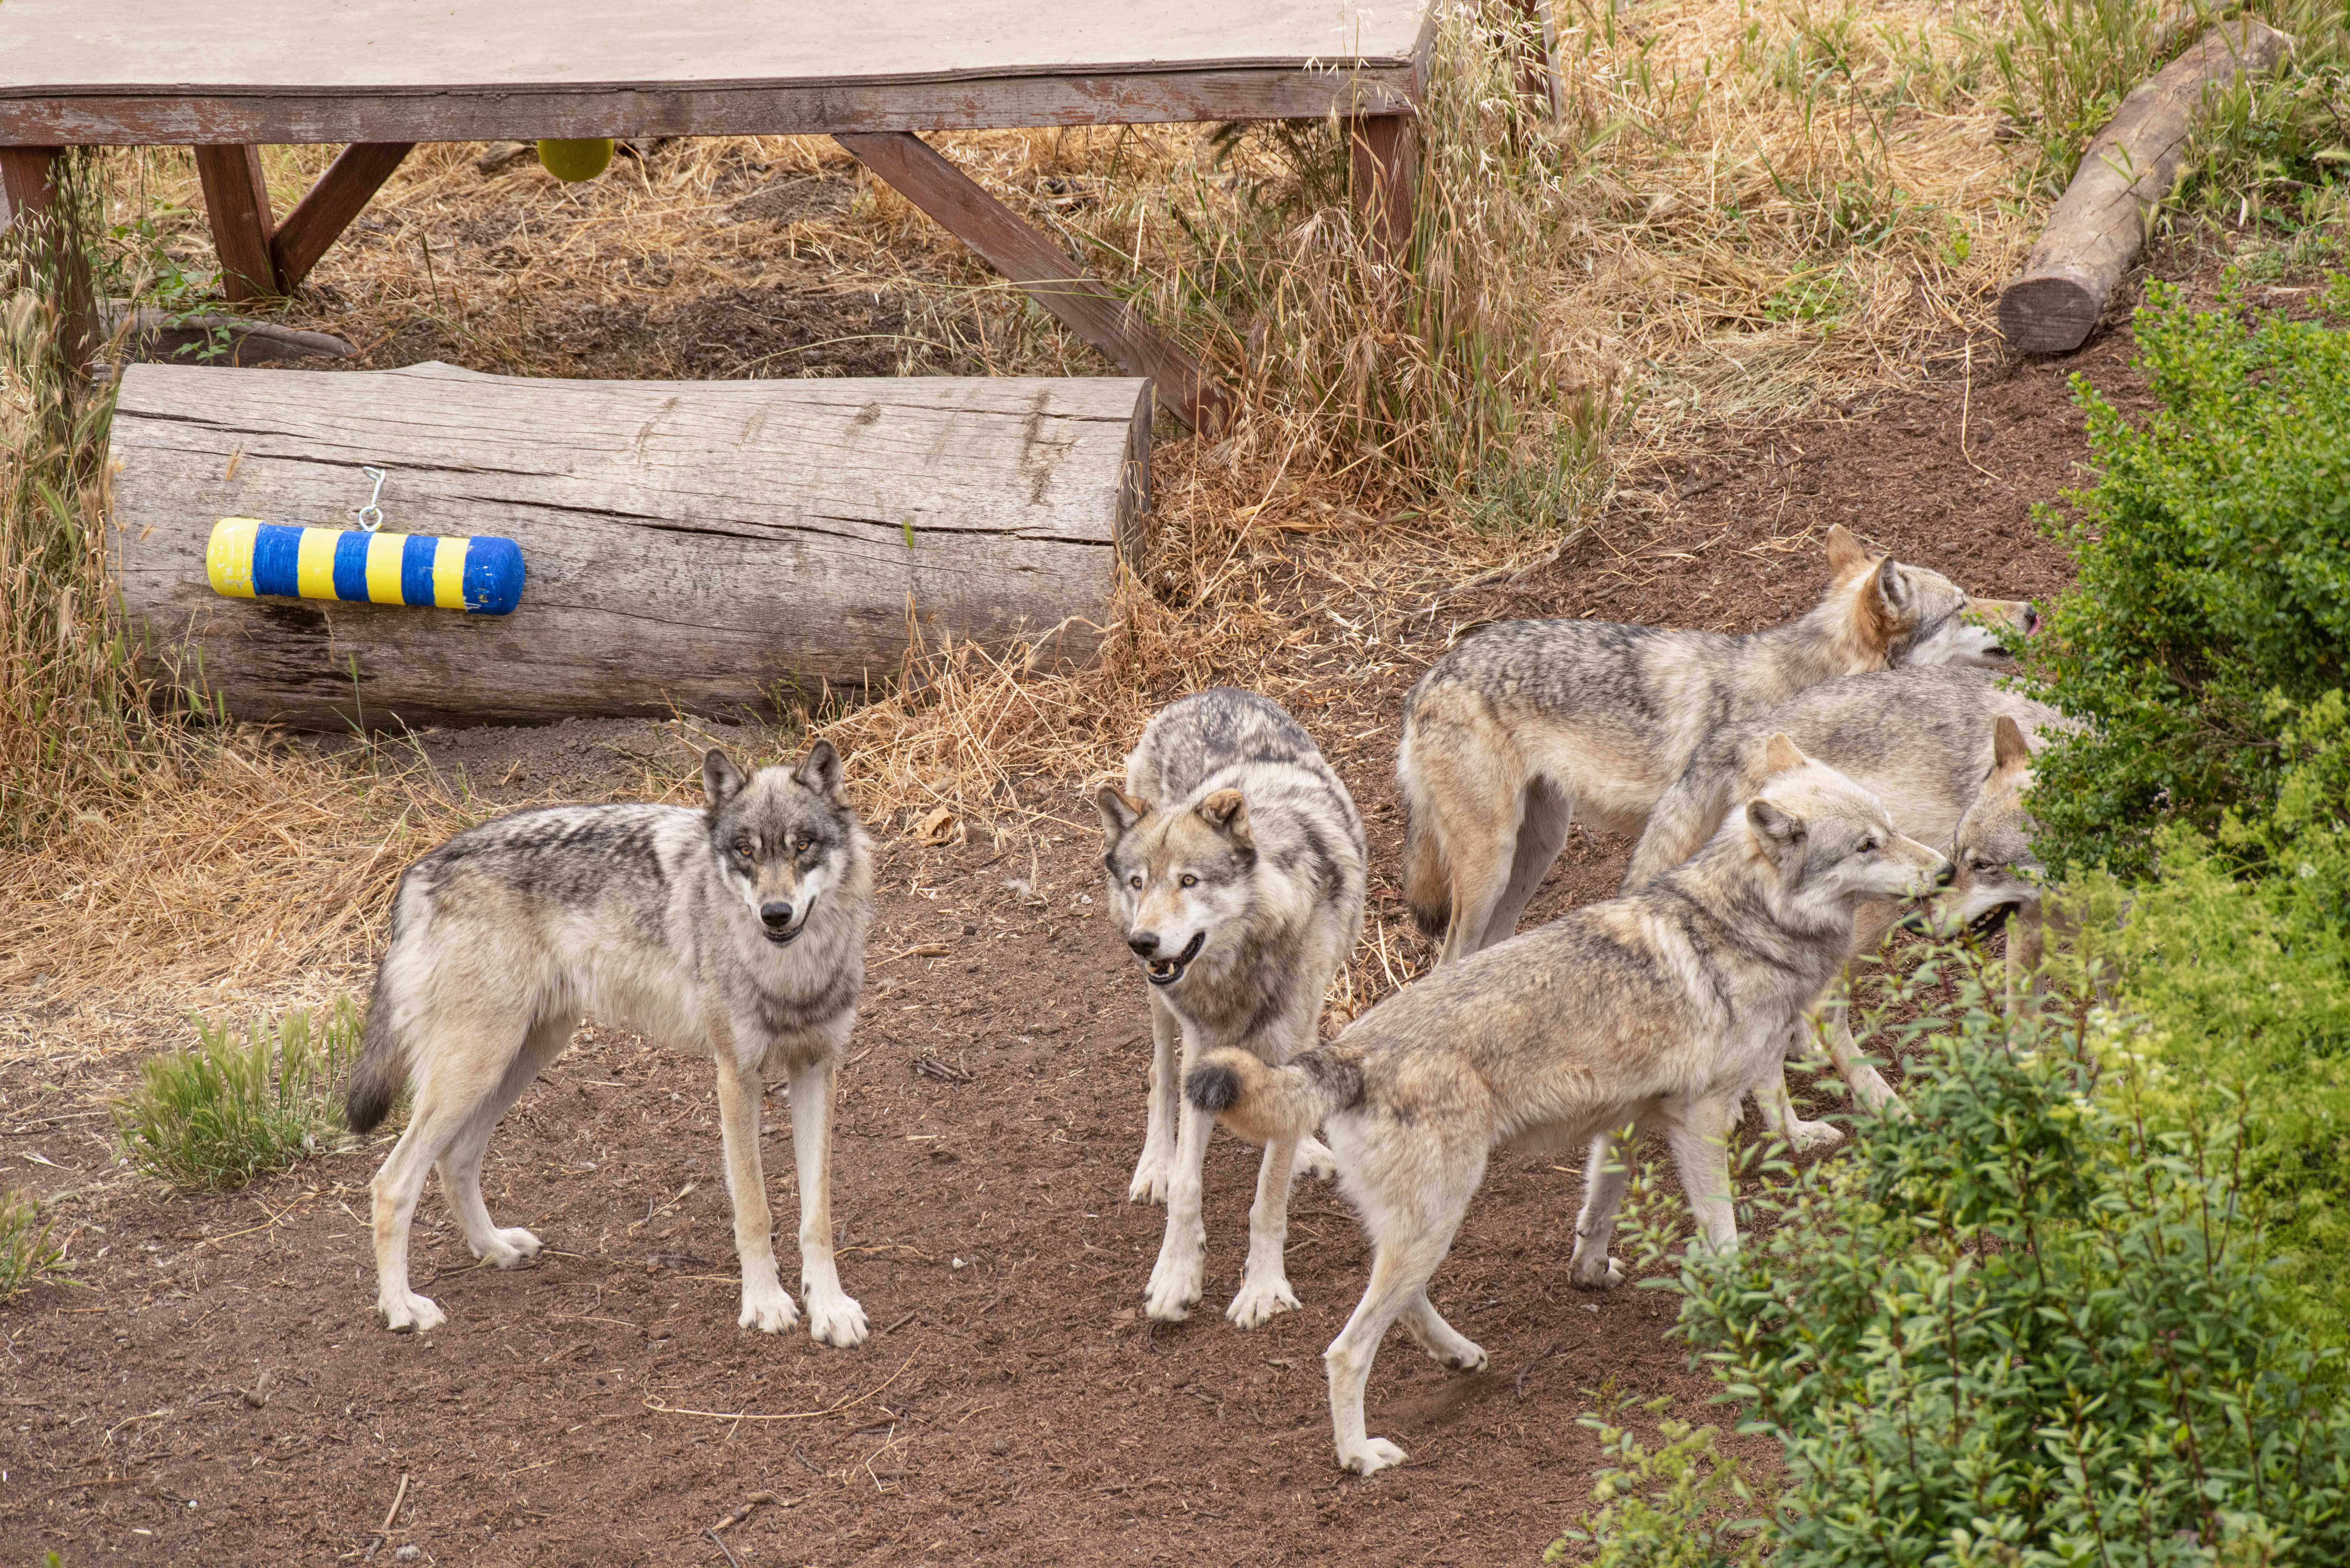 All but one member of the gray wolf pack near a rain stick that was placed in their habitat as part of research at the Oakland Zoo. Photo by Gregory Urquiaga / UC Davis